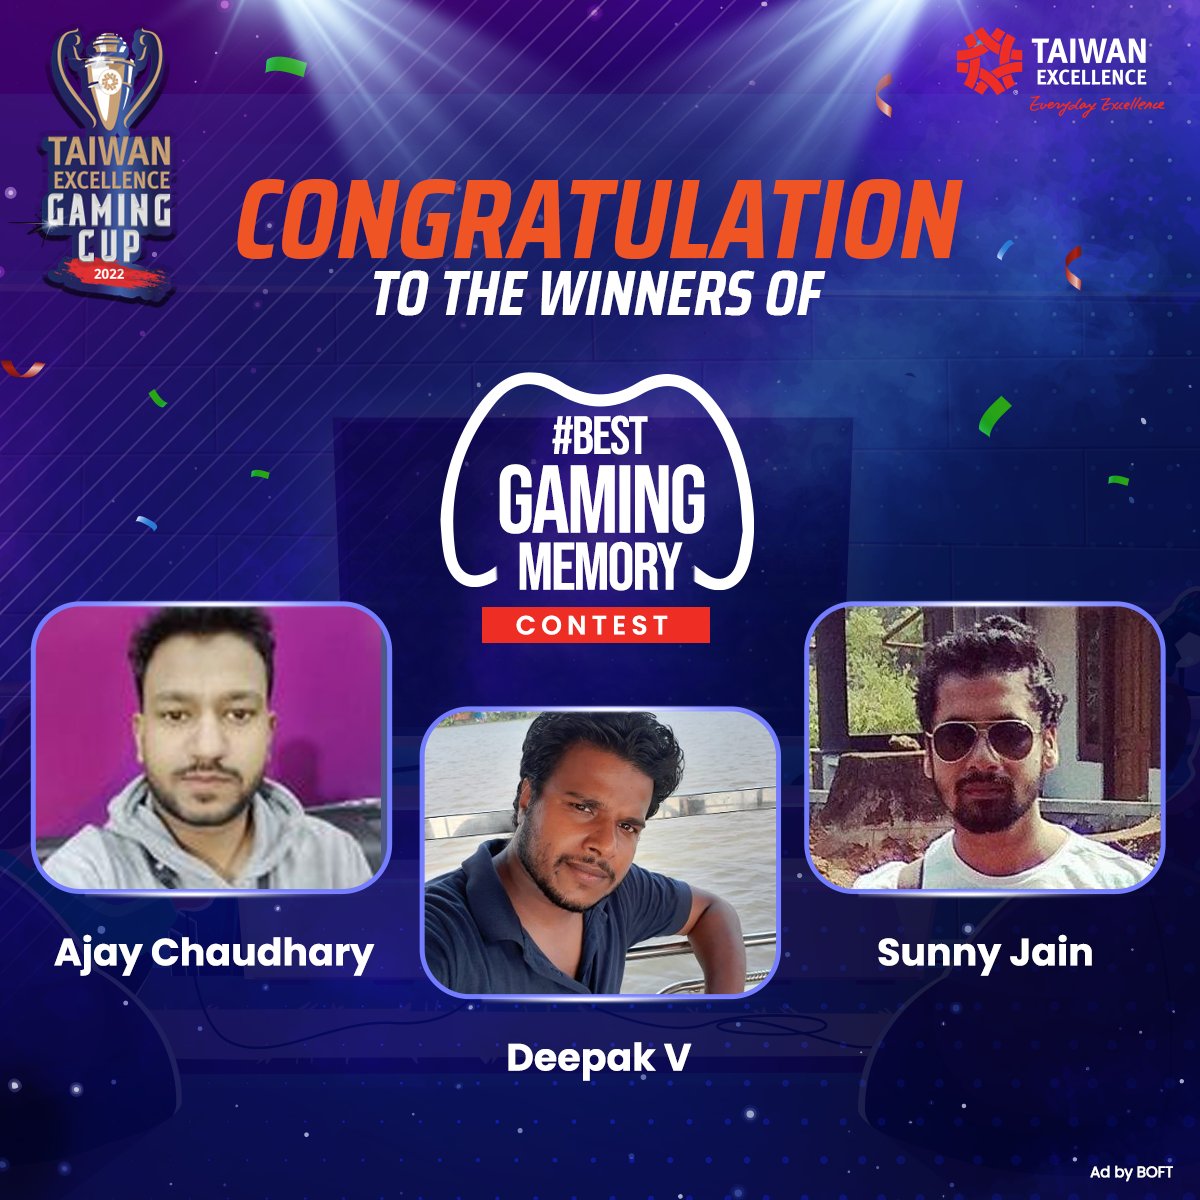 Here's presenting the WINNERS for the #BestGamingMemory contest by Taiwan Excellence.
Congratulations to all of you!

Please DM us your details to claim the prize.

Stay tuned for more such amazing contests!

#TaiwanExcellence #EverydayExcellence #TEGC2022 #Contest #ContestAlert